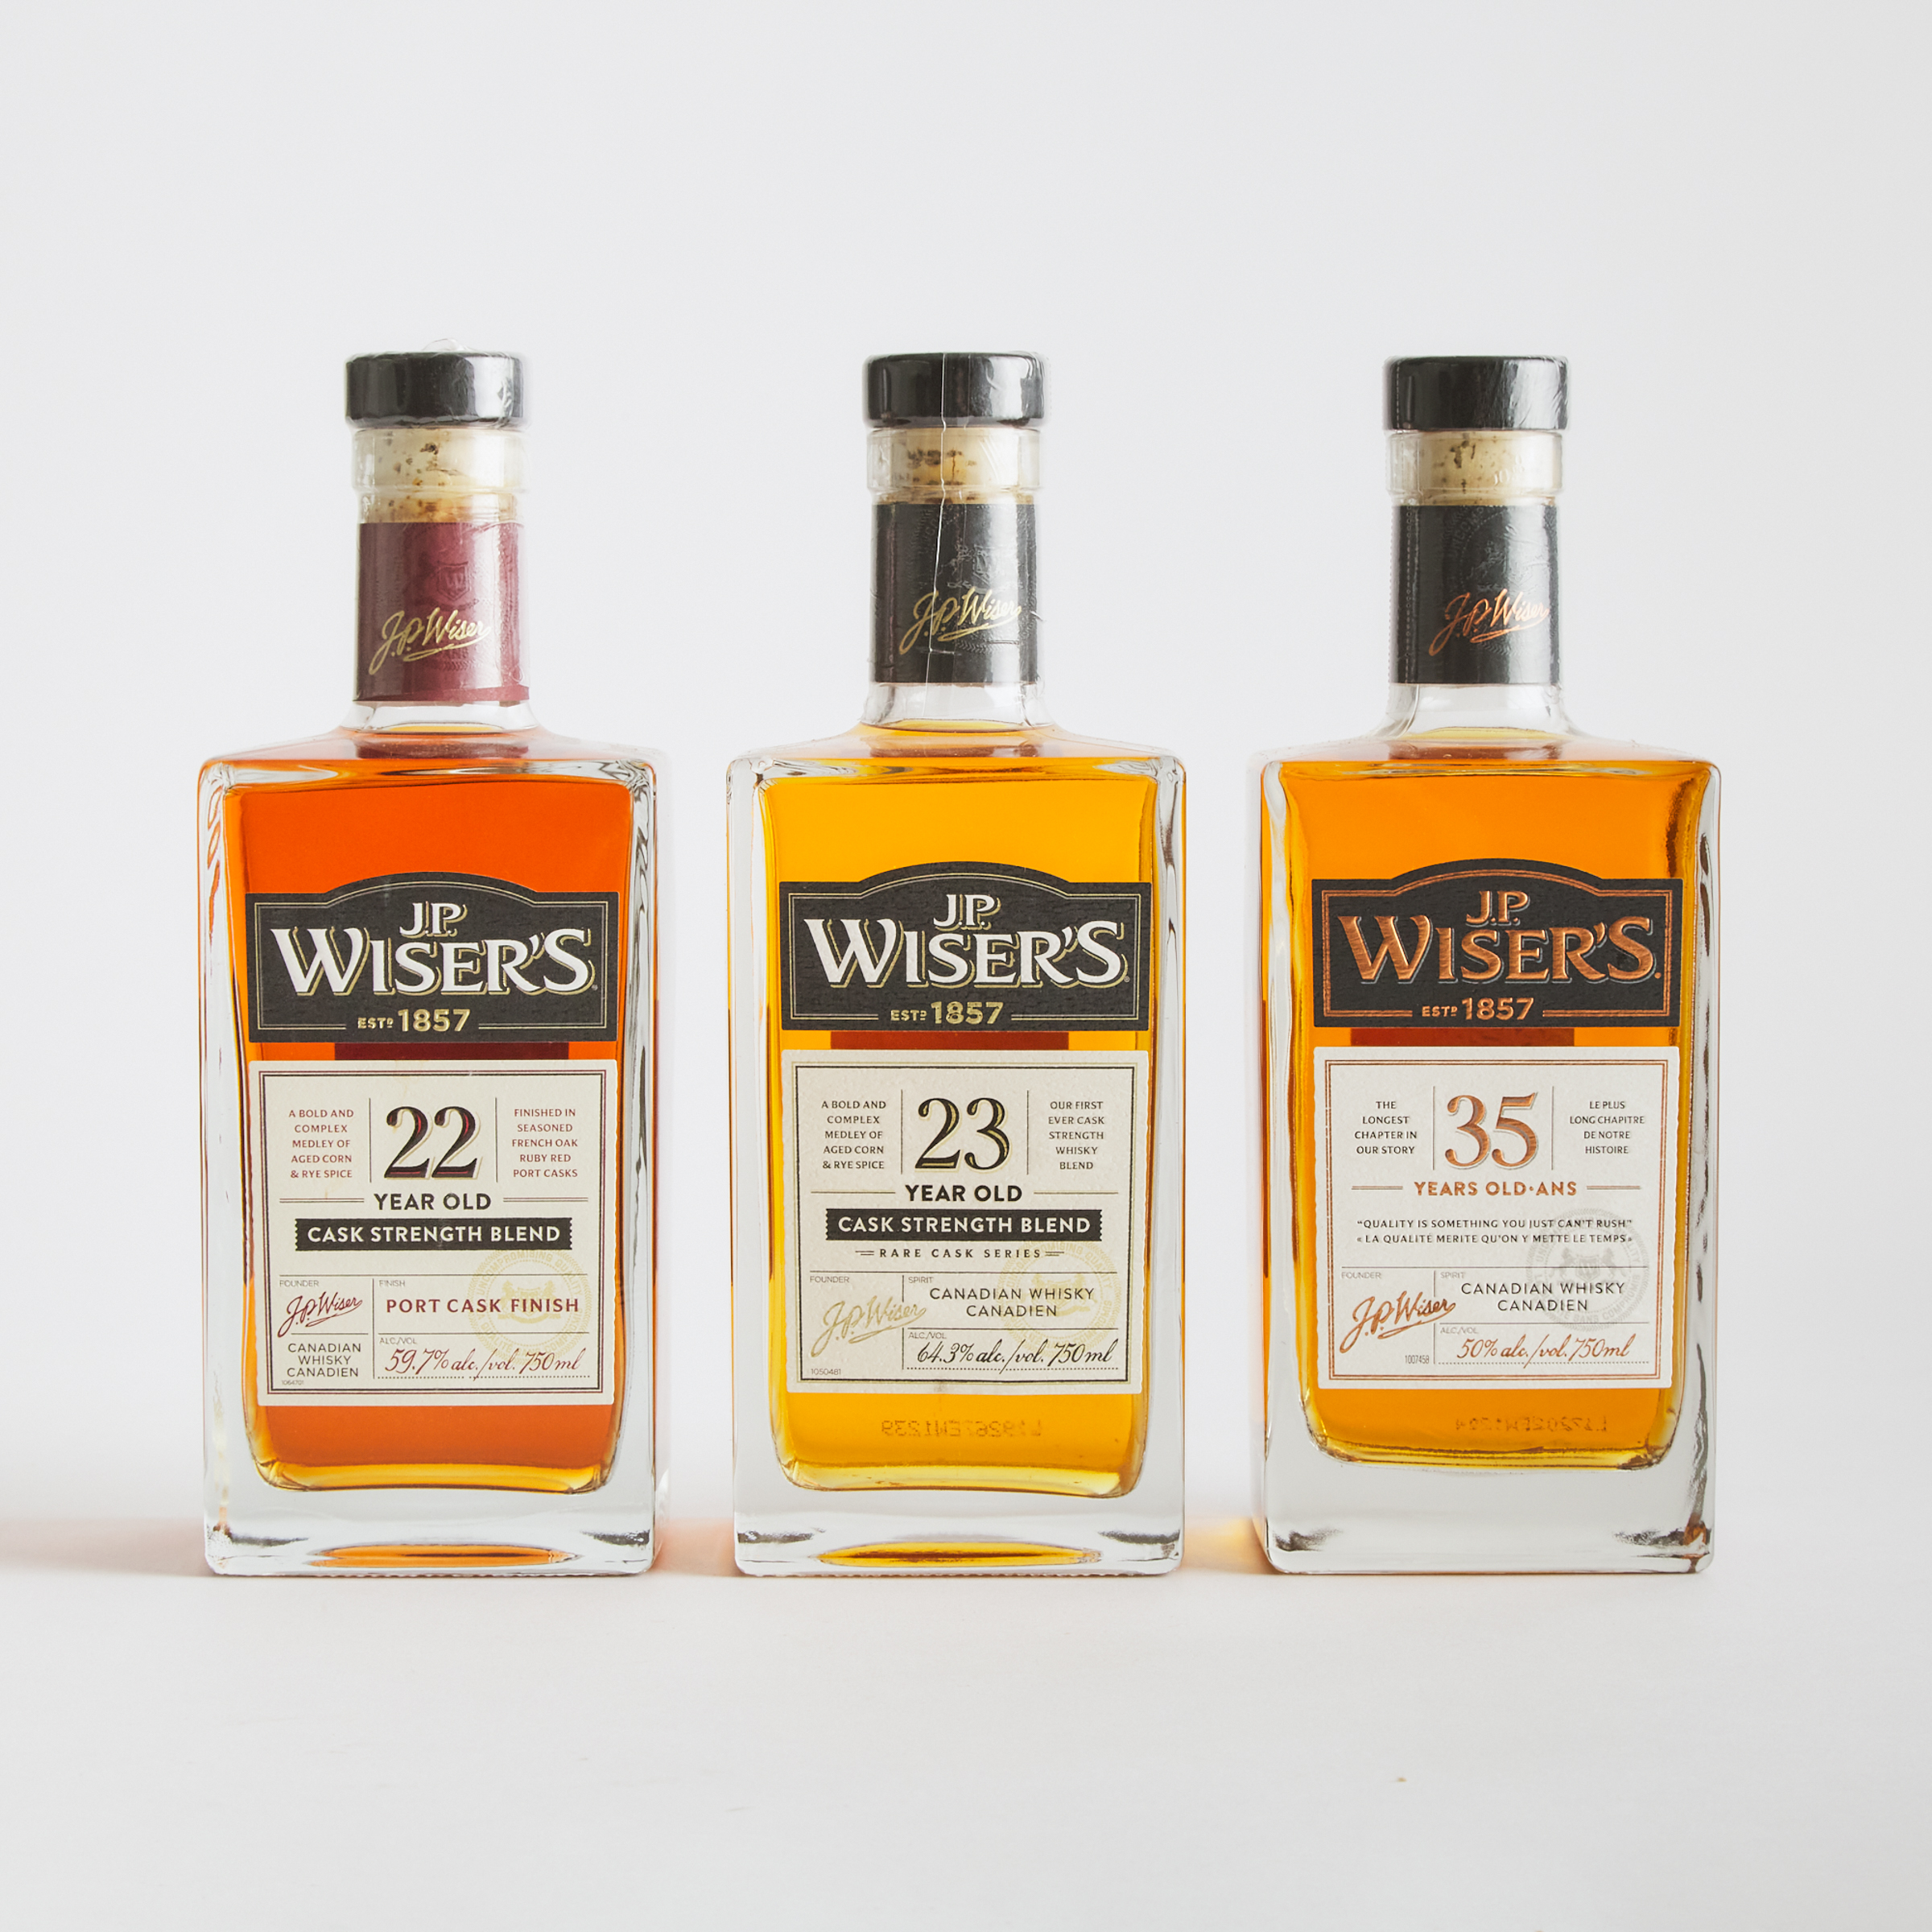 J.P. WISER'S CANADIAN WHISKY 22 YEARS (ONE 750 ML)
J.P. WISER'S CANADIAN WHISKY 23 YEARS (ONE 750 ML)
J.P. WISER'S CANADIAN WHISKY 35 YEARS (ONE 750 ML)